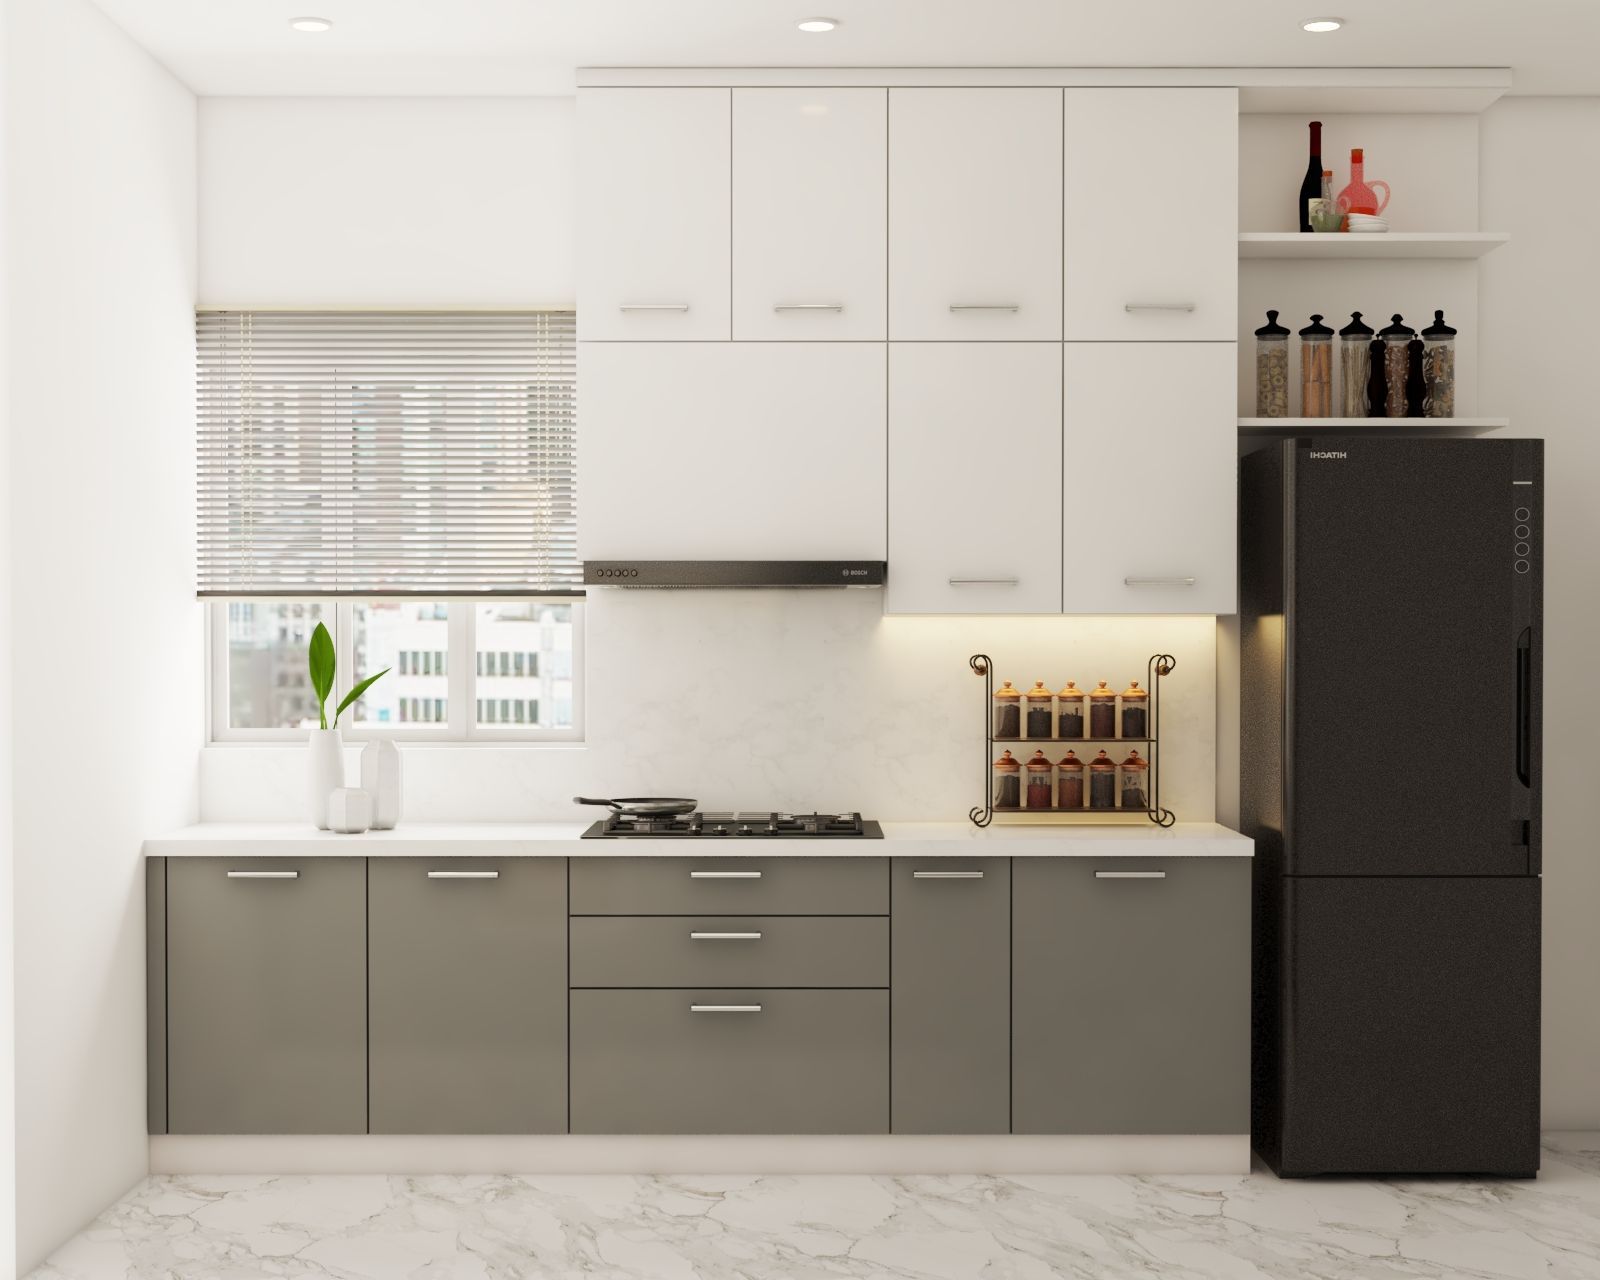 Modern Modular Parallel Kitchen Design With A Marble Countertop